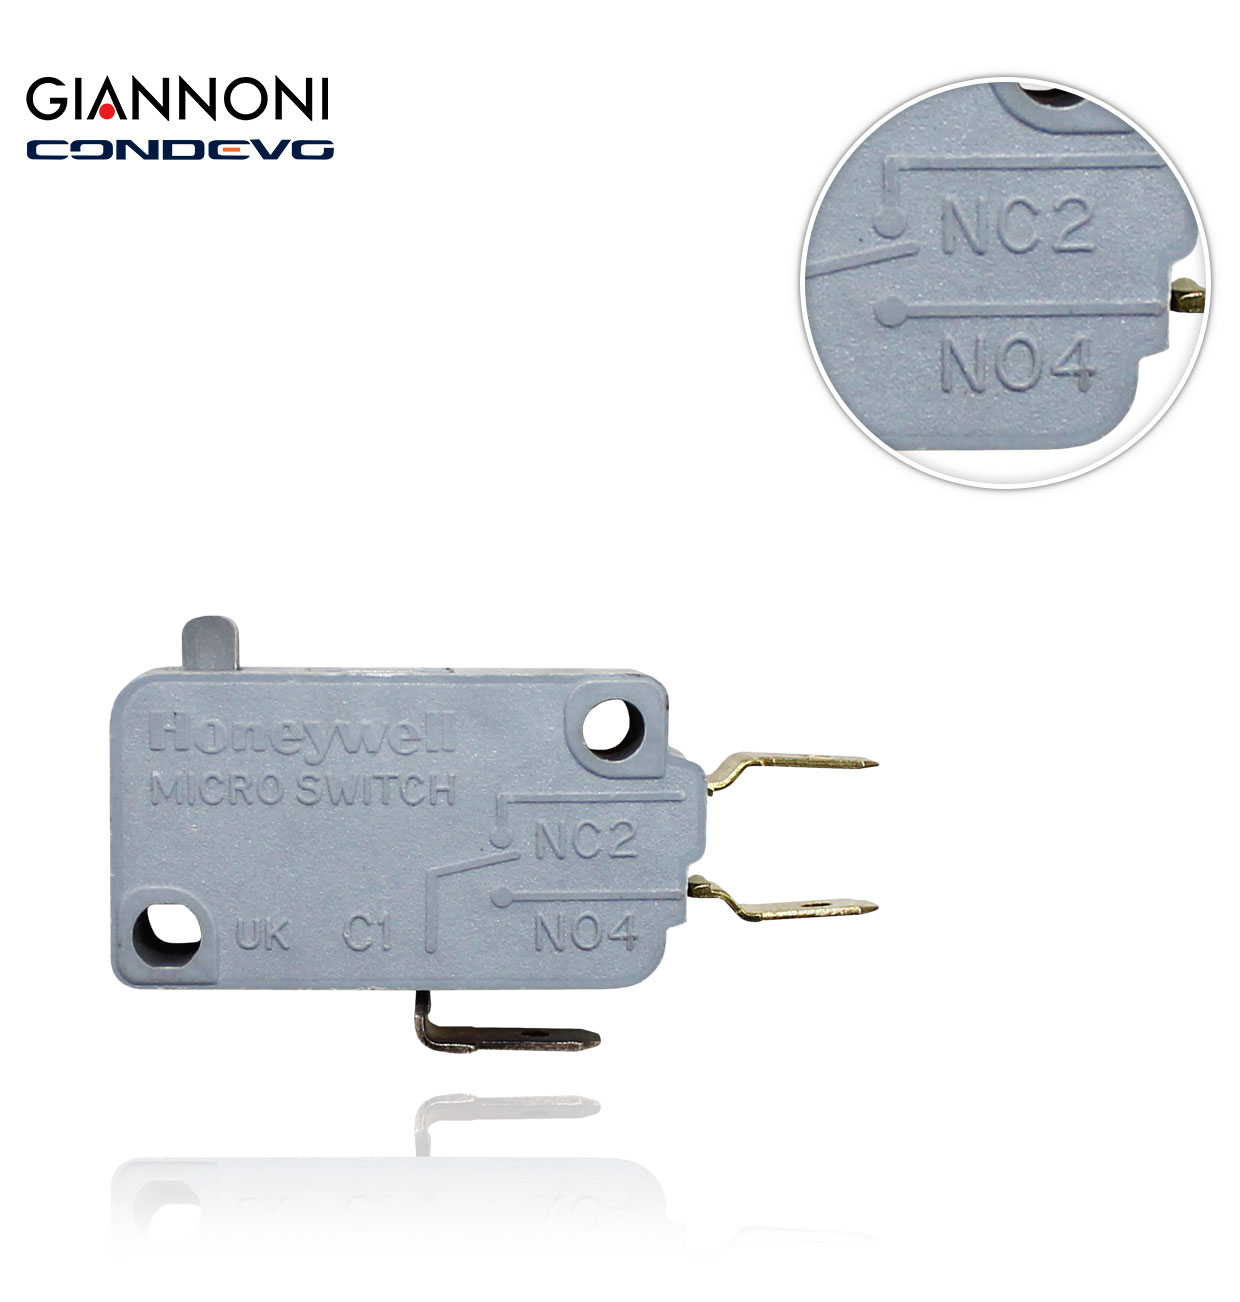 GIANNONI MICROSWITCH FOR PRESSURE SWITCH/DIVERTER VALVE